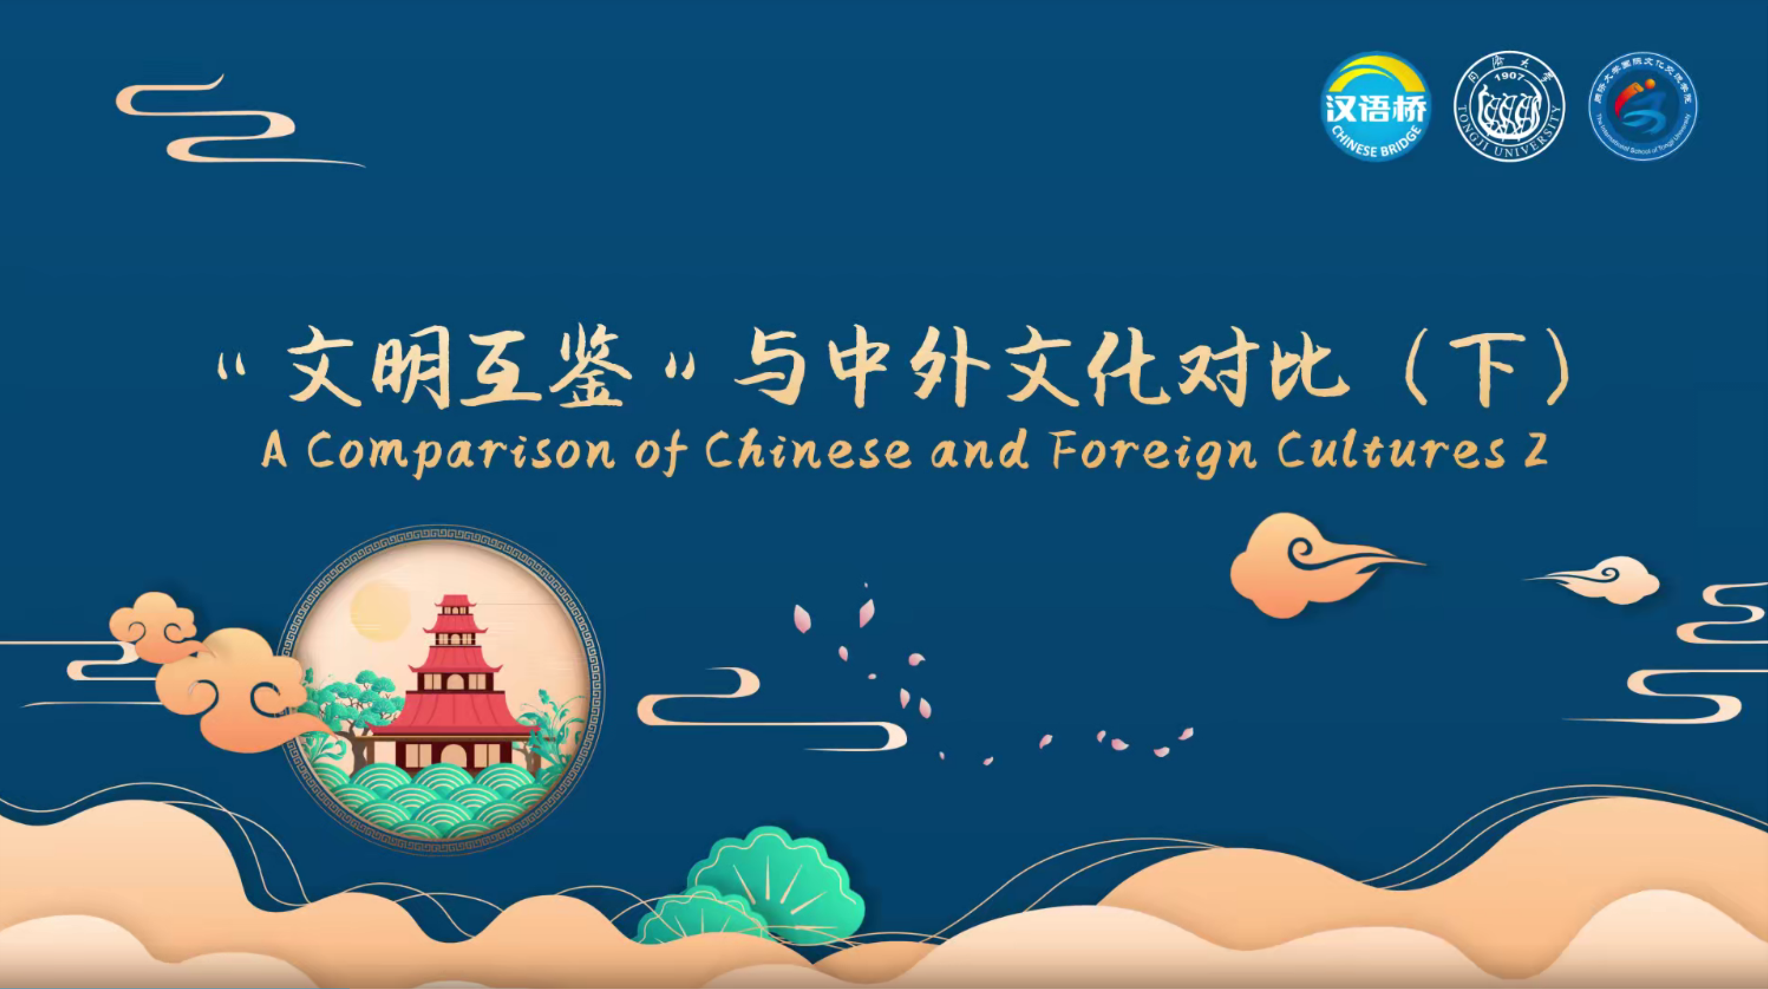 A Comparison of Chinese and Foreign Cultures（2）